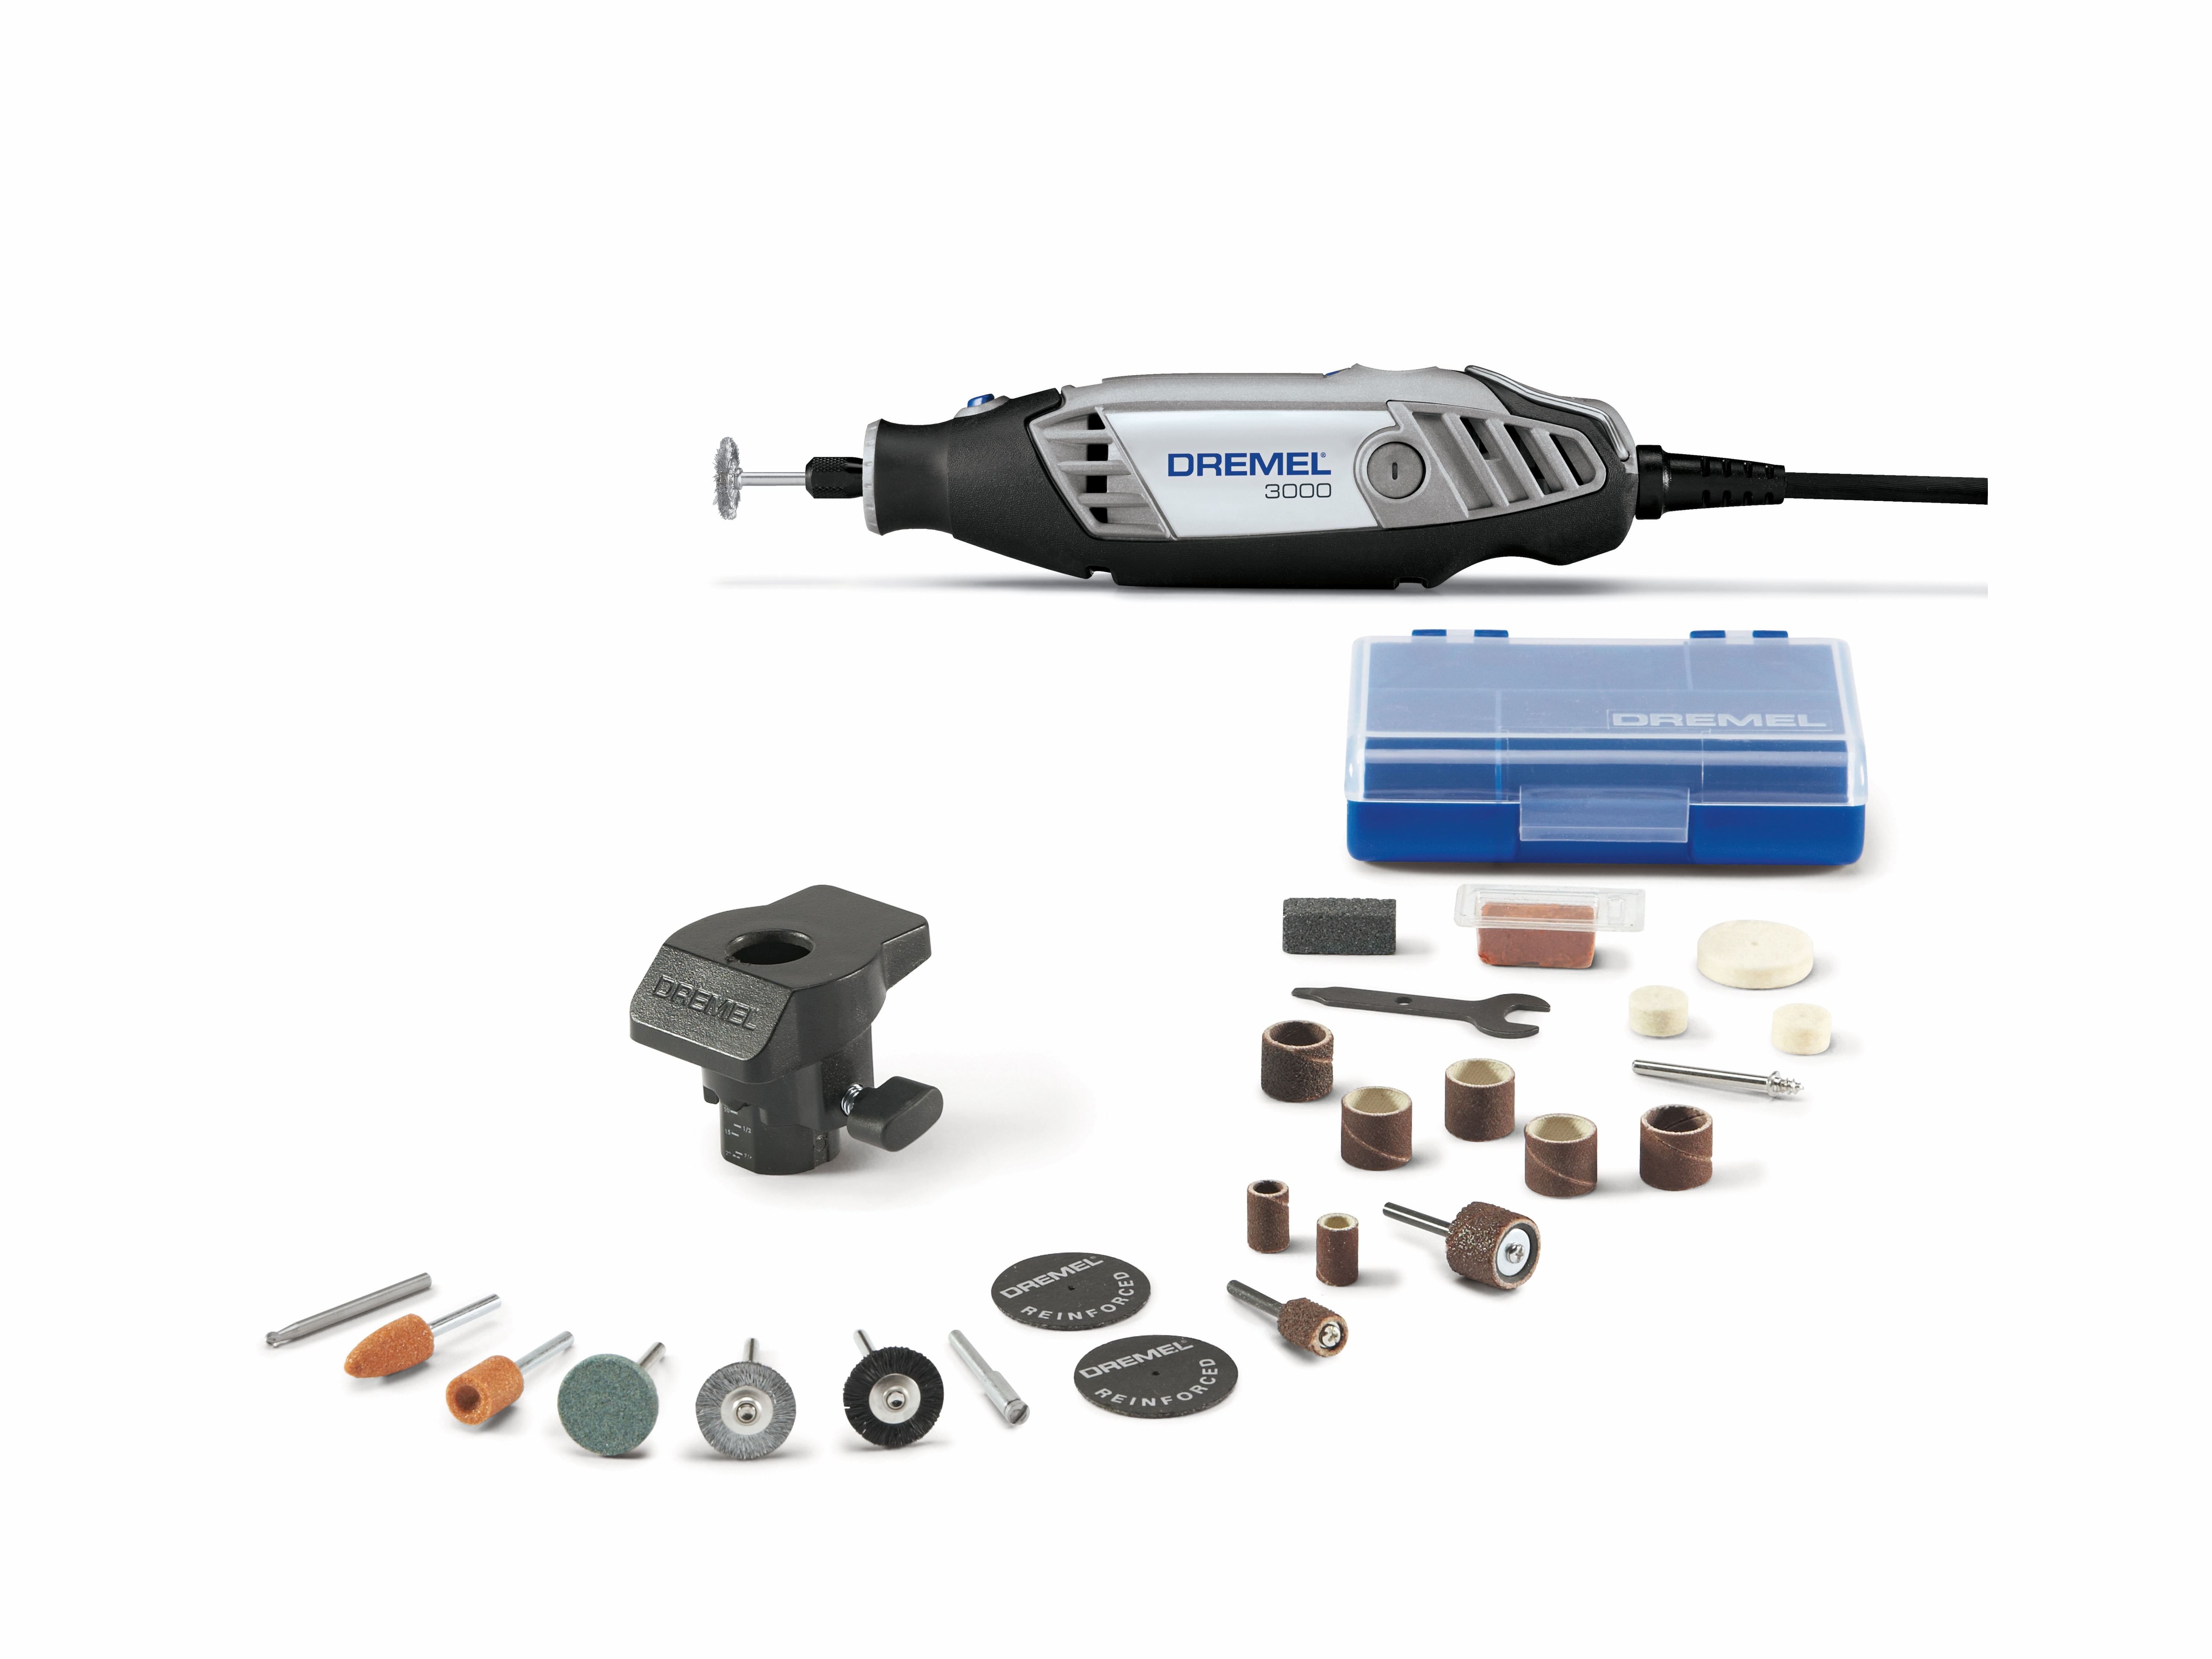 Dremel 3000-1/24 Variable-Speed Rotary Tool Kit - 1 Attachment & 24 Ideal for Variety of Crafting and DIY – Cutting, Sanding, Grinding, Polishing, Drilling, and - Walmart.com